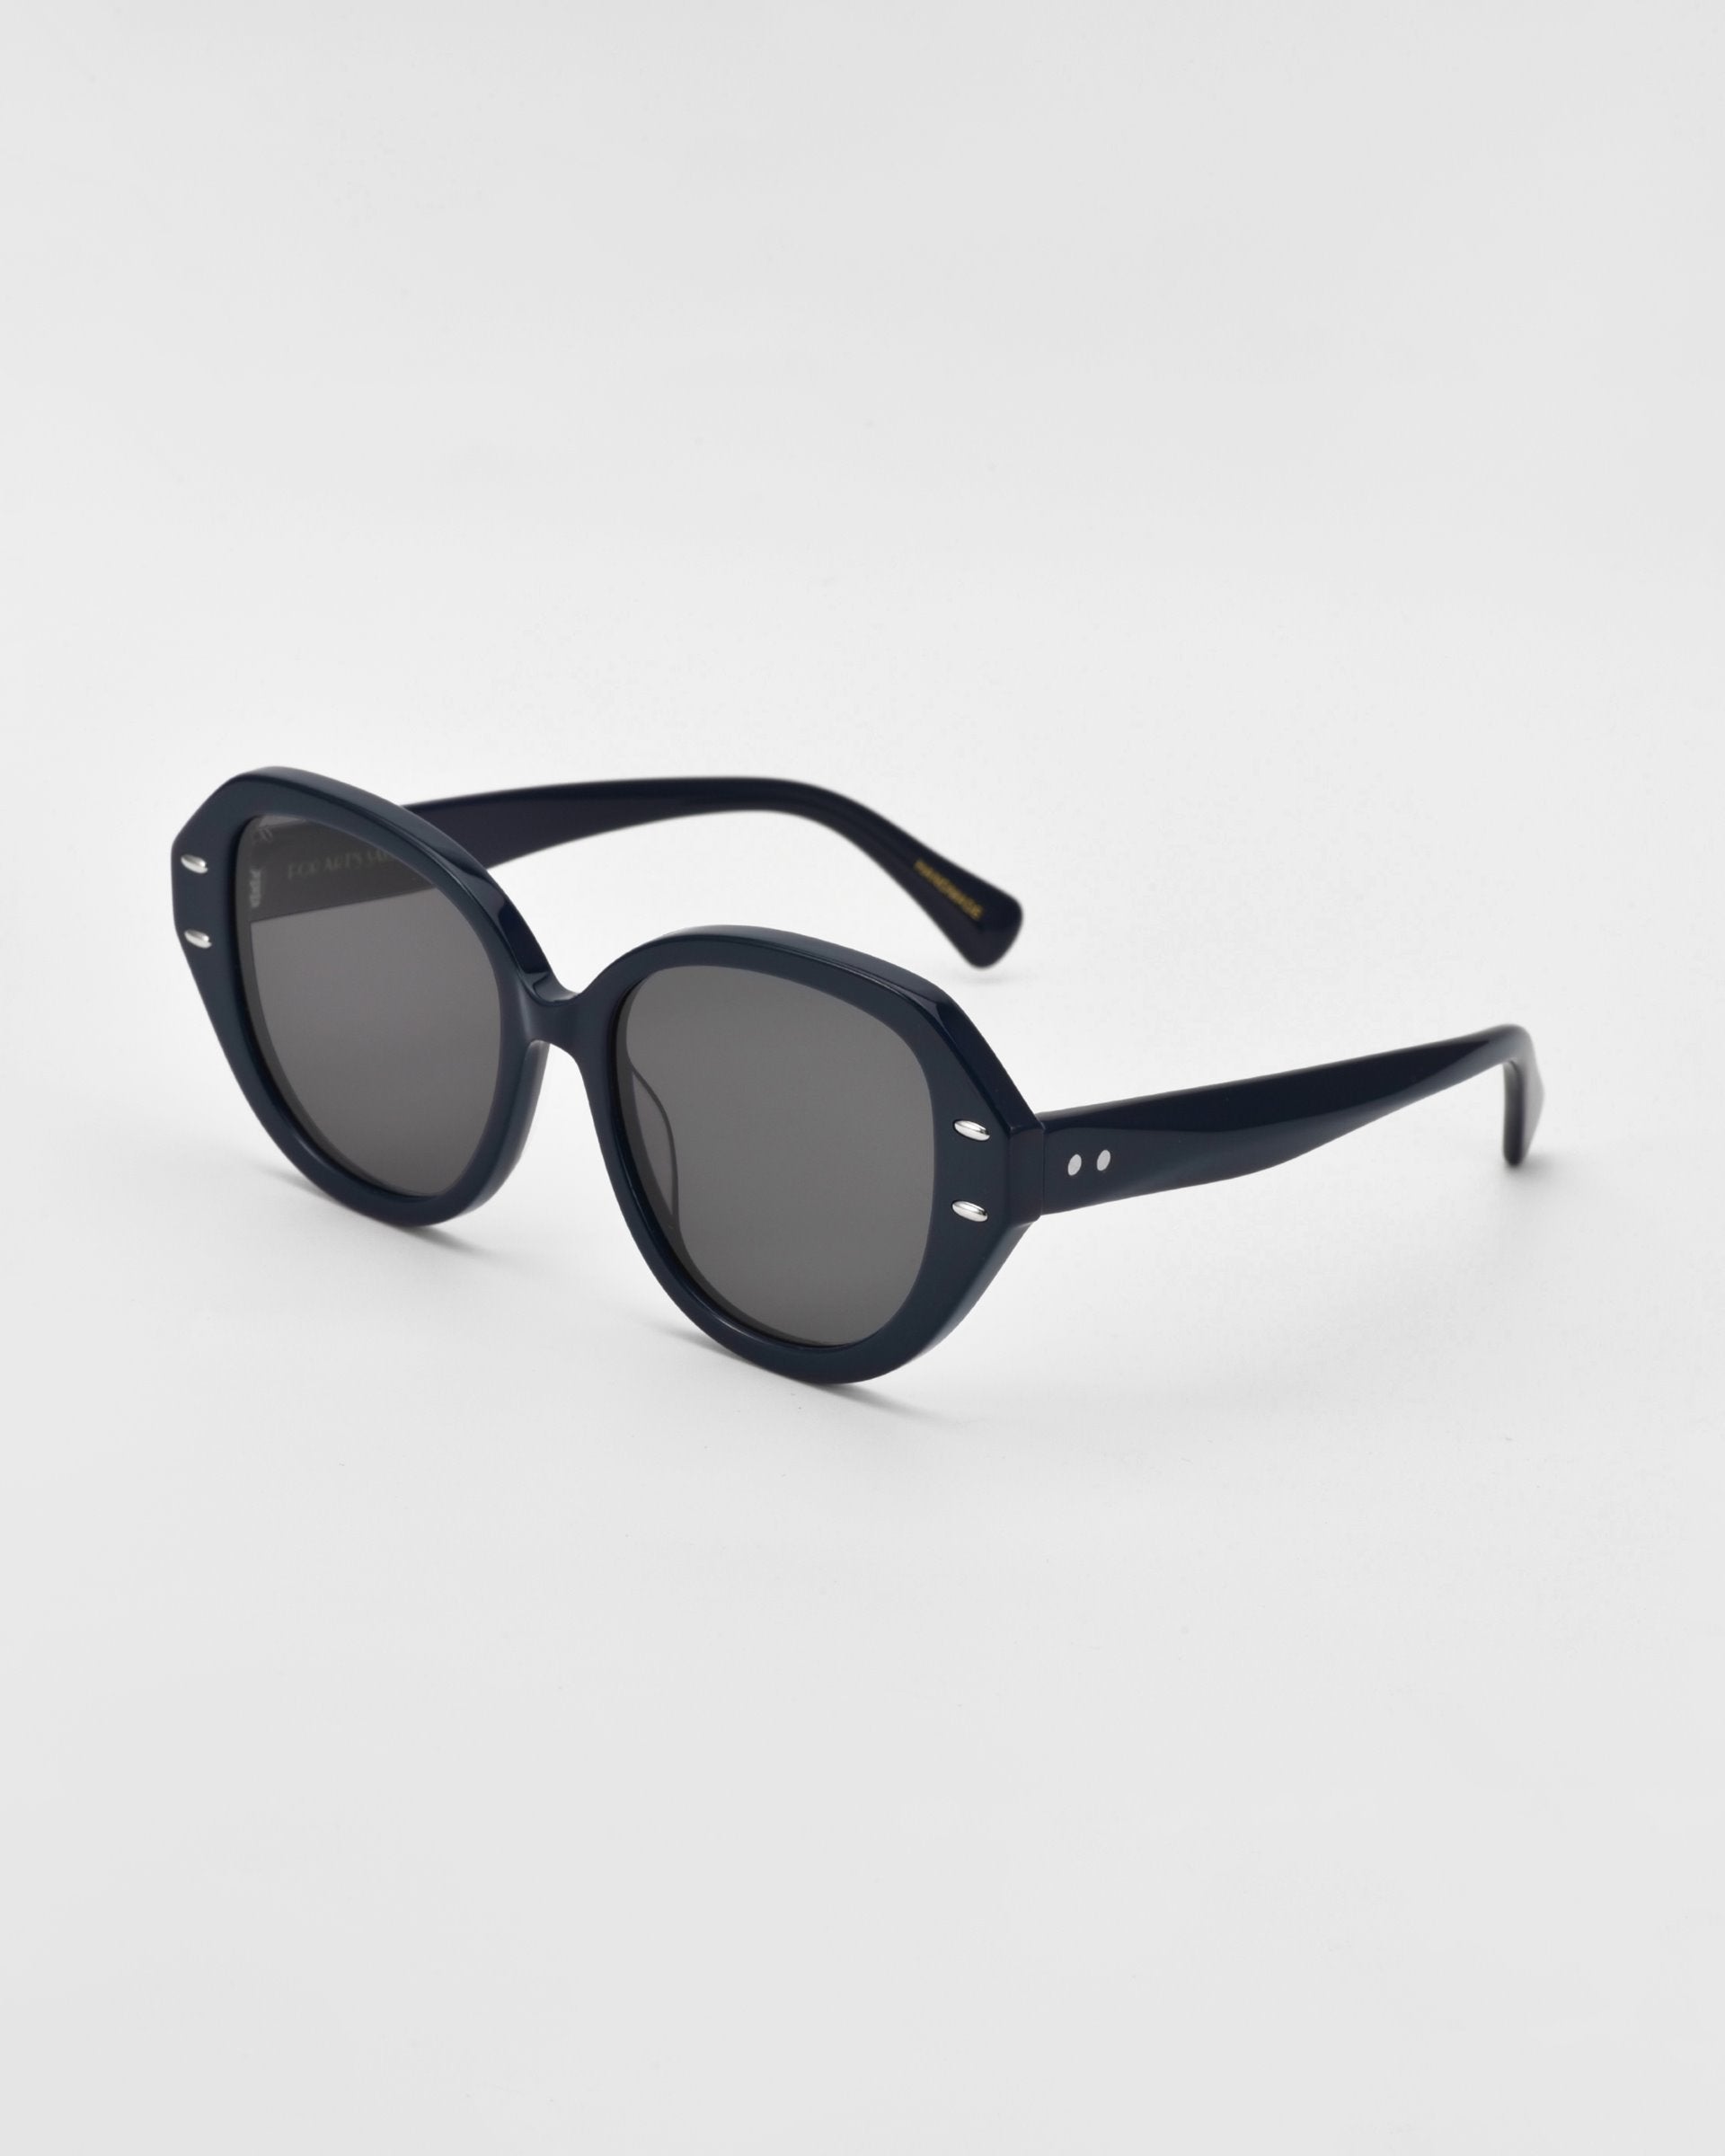 A pair of black, thick-framed cat-eye sunglasses with round lenses and small decorative silver dots near the hinges is positioned on a plain white background. The frames are crafted from plant-based acetate, adding an eco-friendly touch to this stylish accessory. These are the Mirage by For Art&#39;s Sake®.